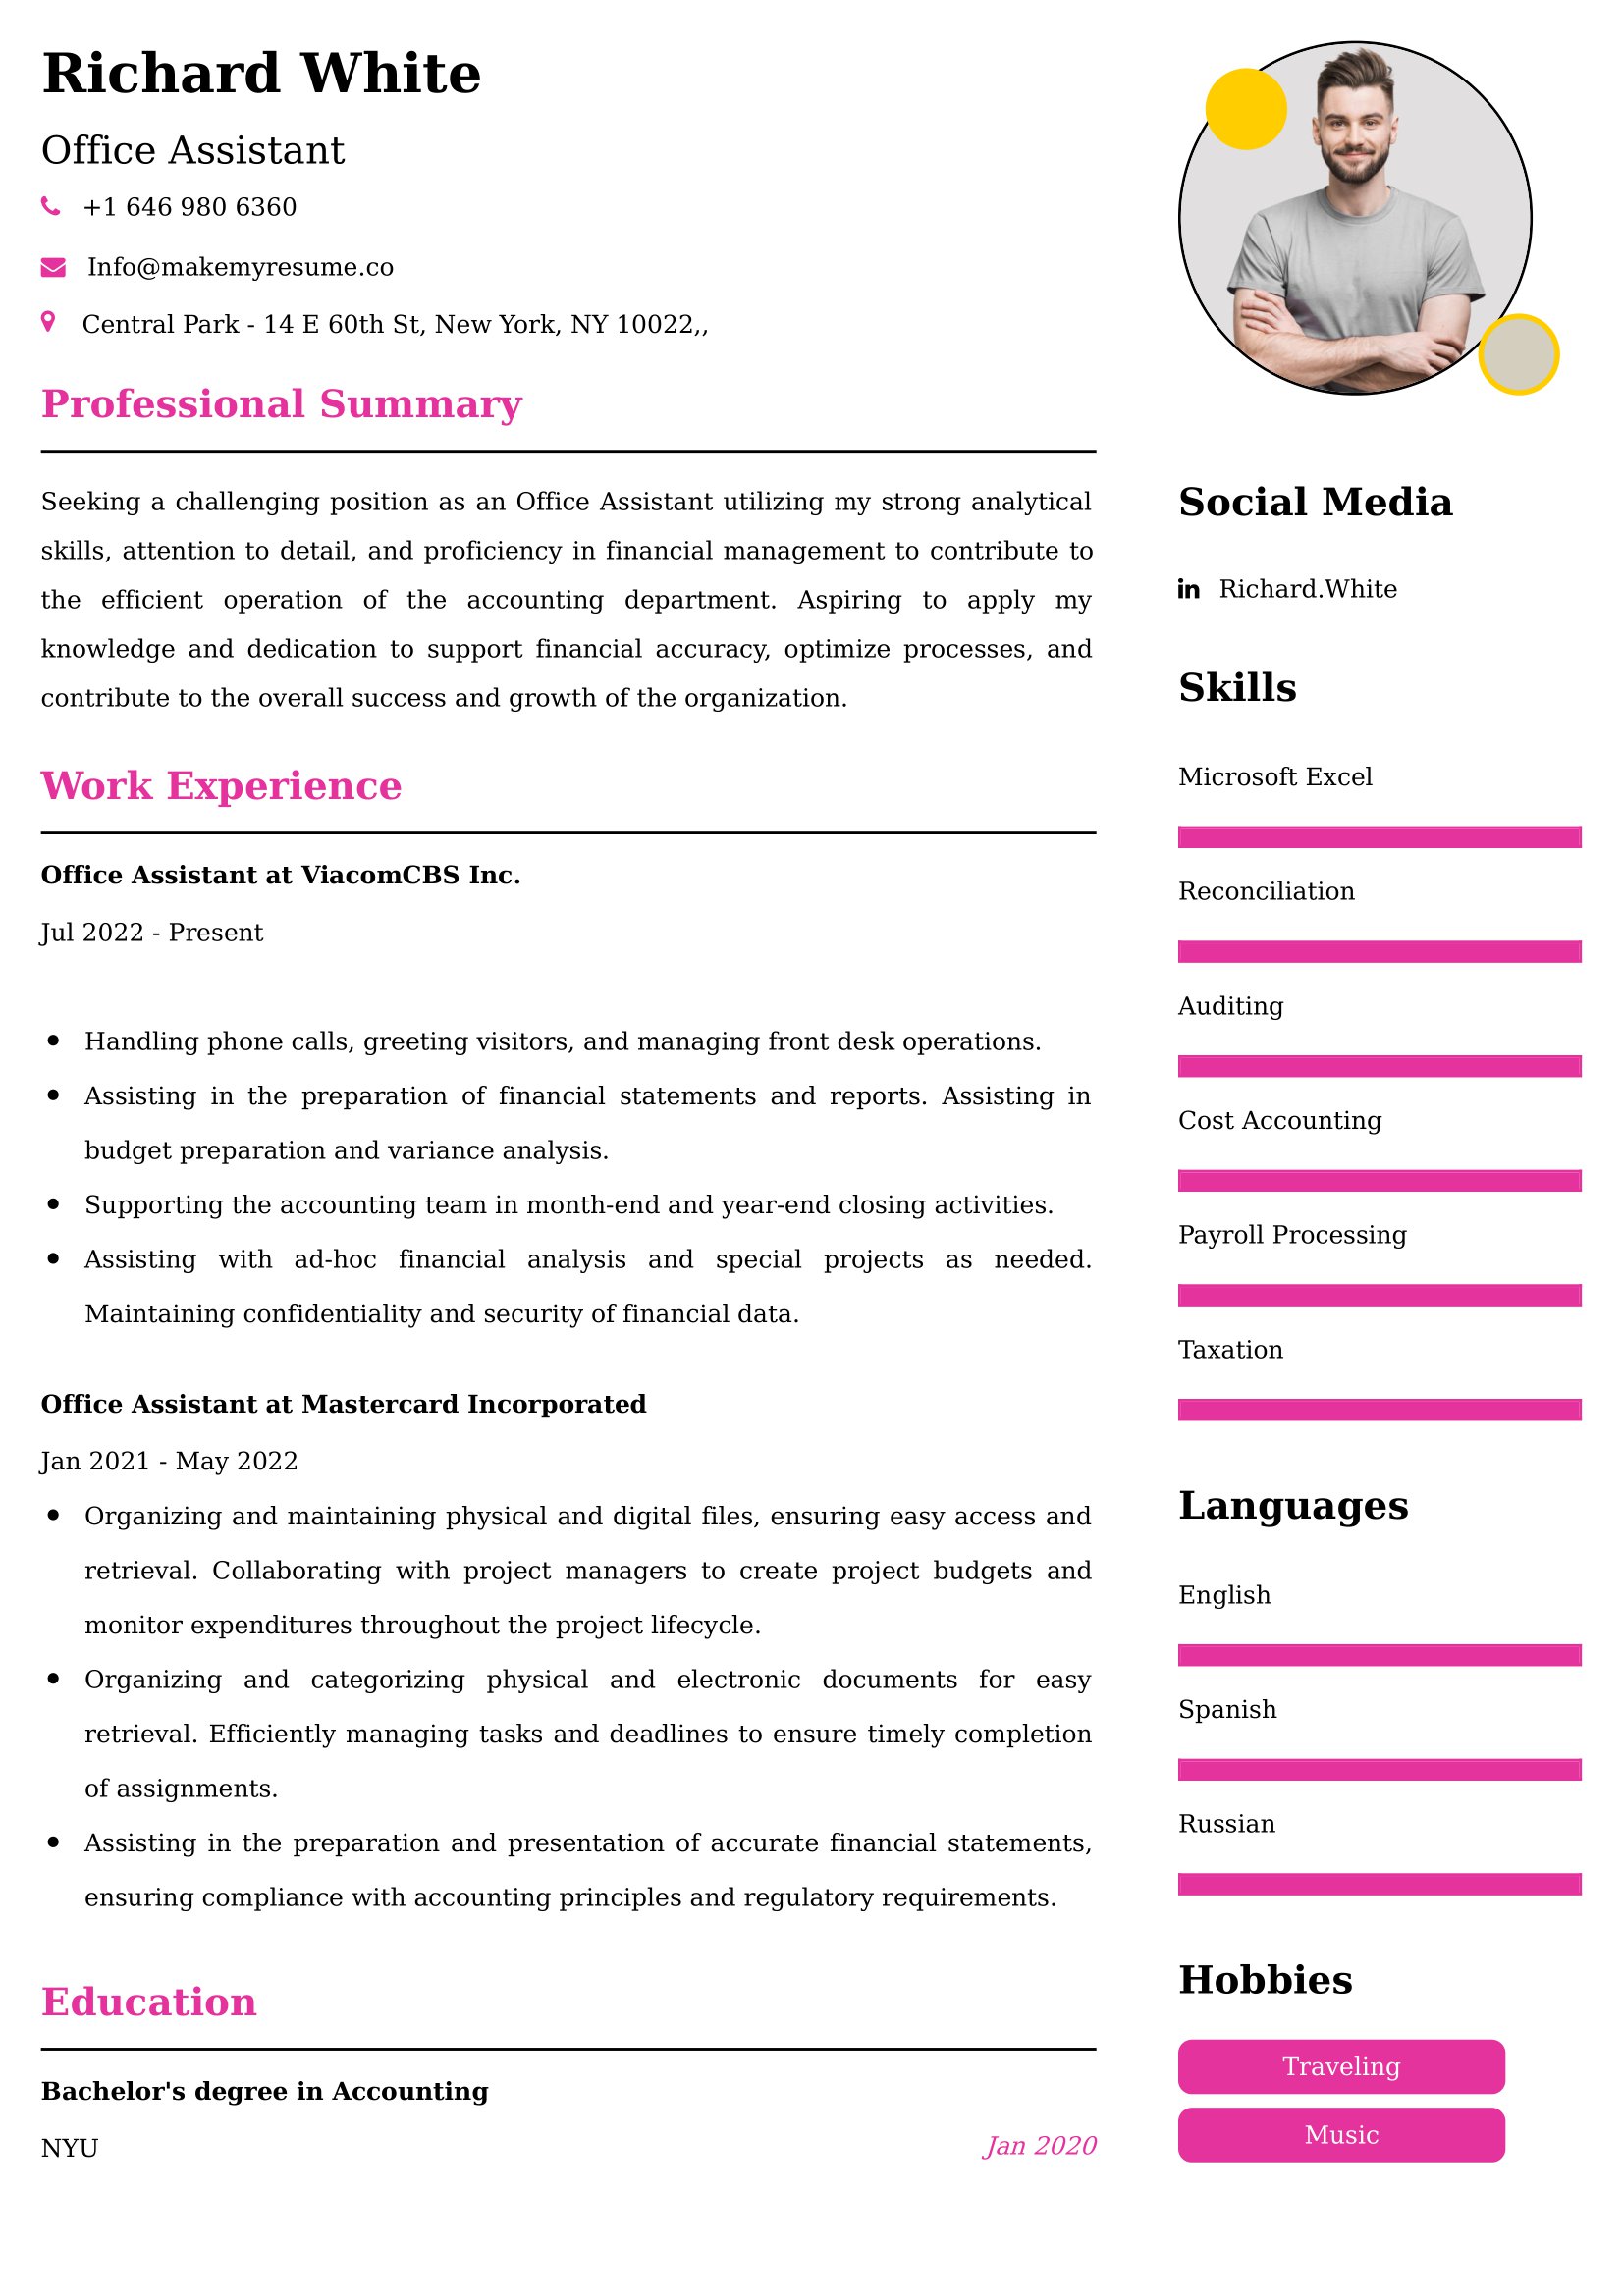 Office Assistant CV Examples - US Format